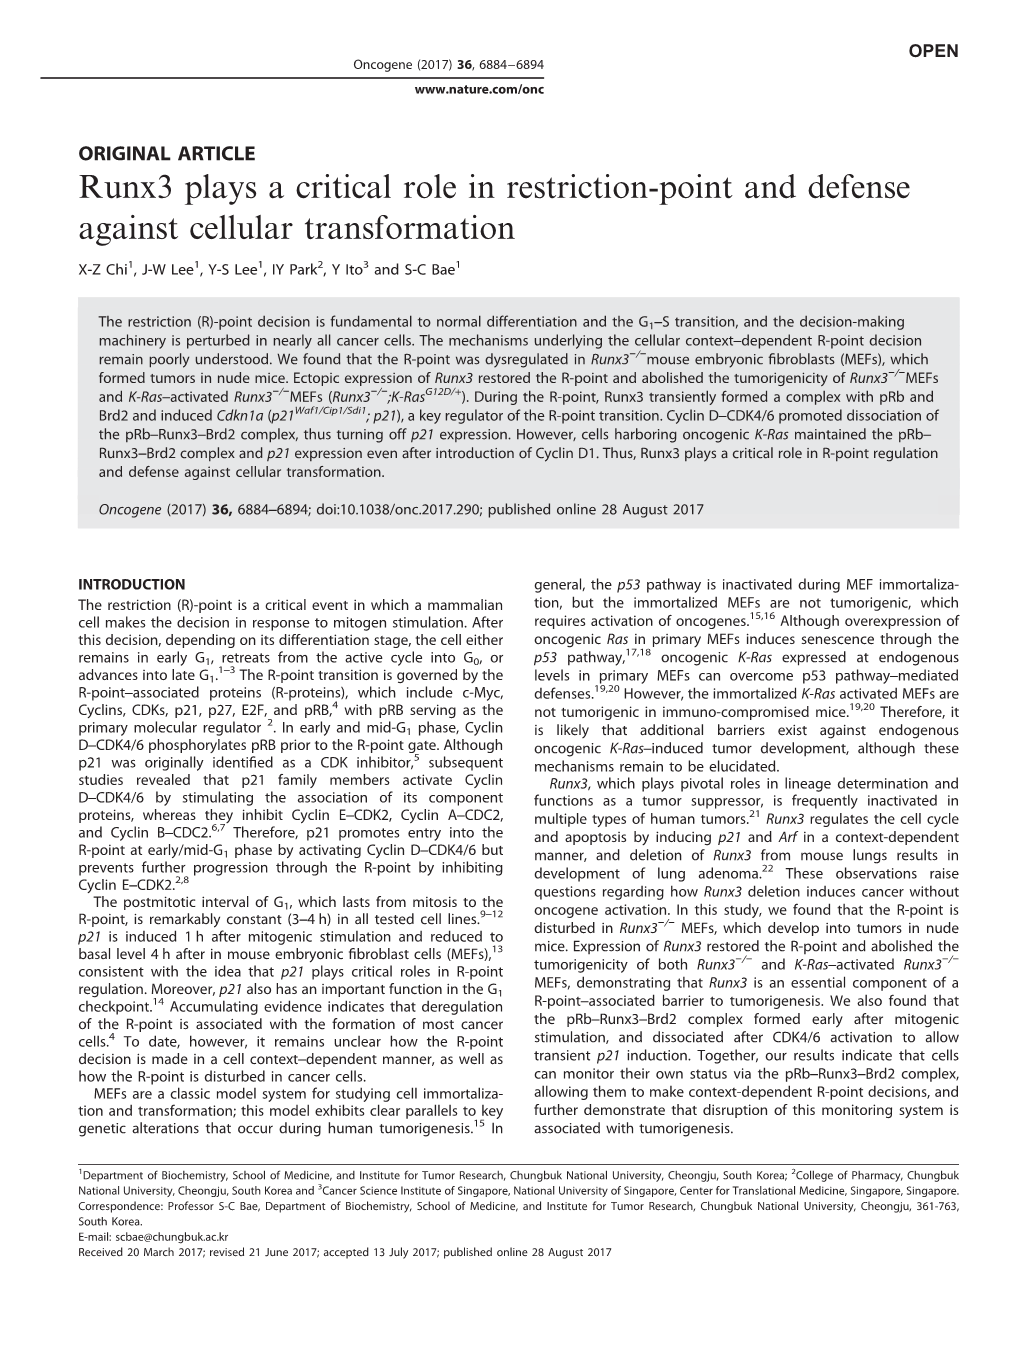 Runx3 Plays a Critical Role in Restriction-Point and Defense Against Cellular Transformation